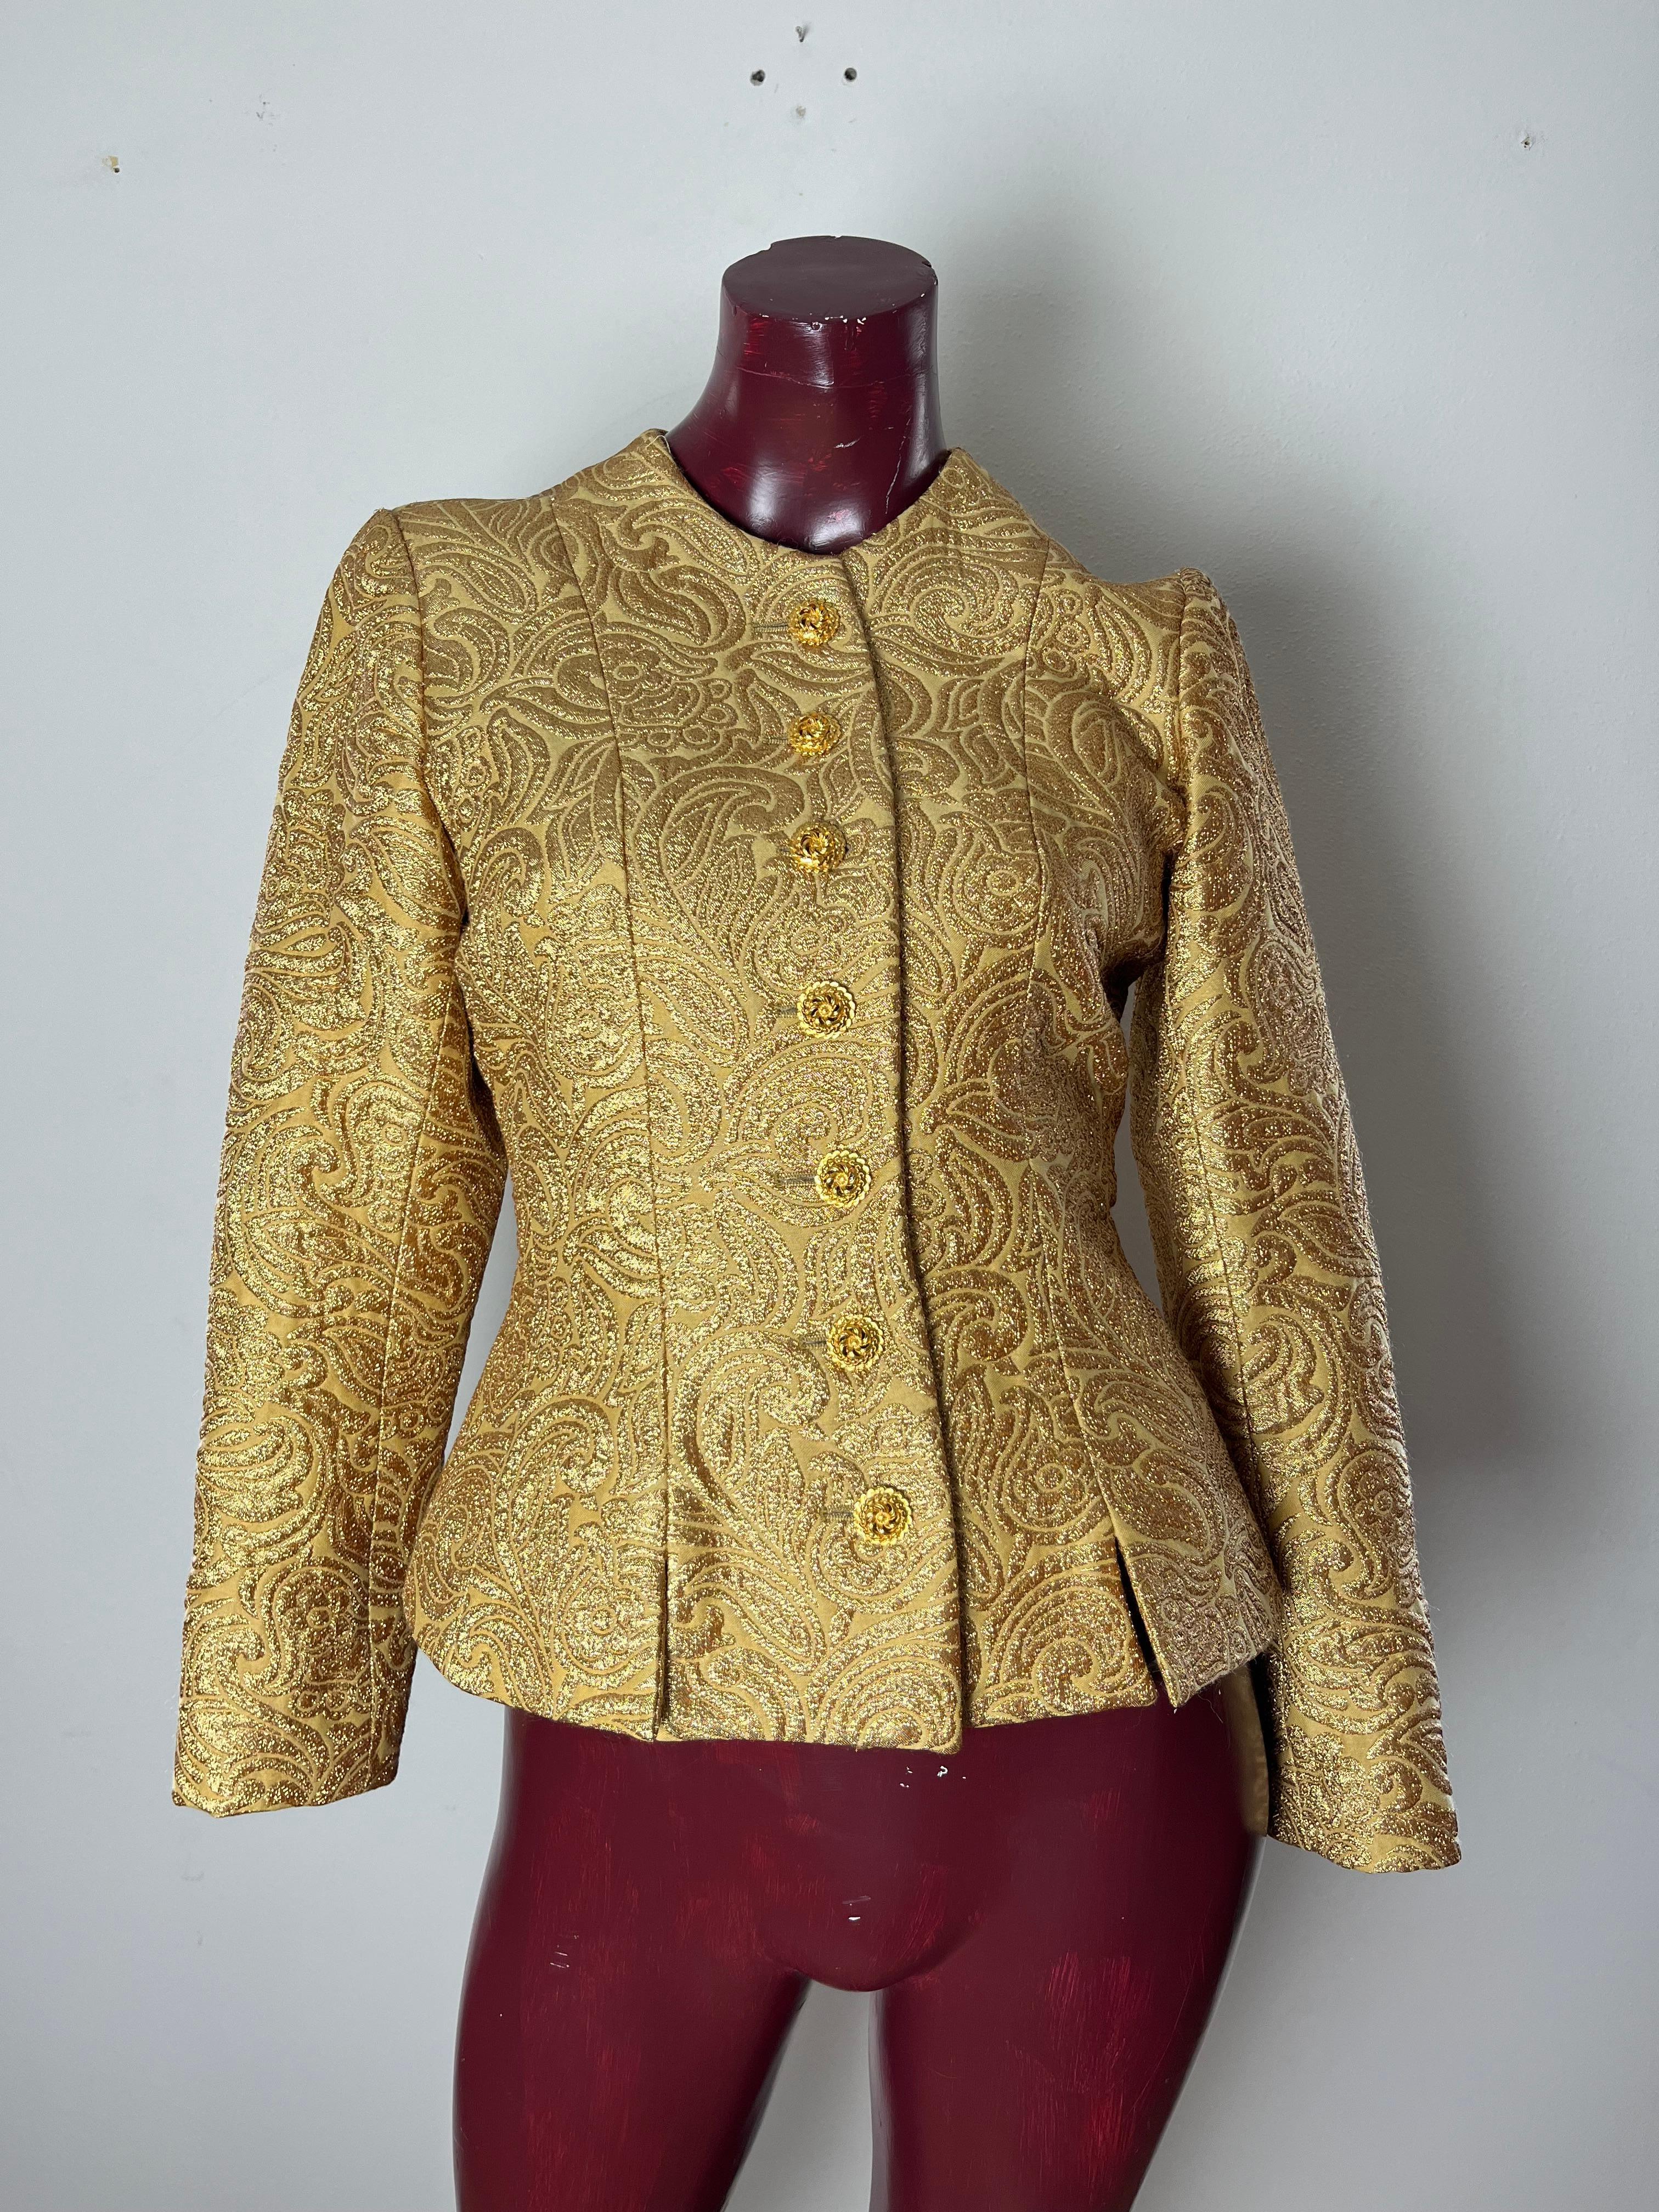 YSL gold brocade suit For Sale 6